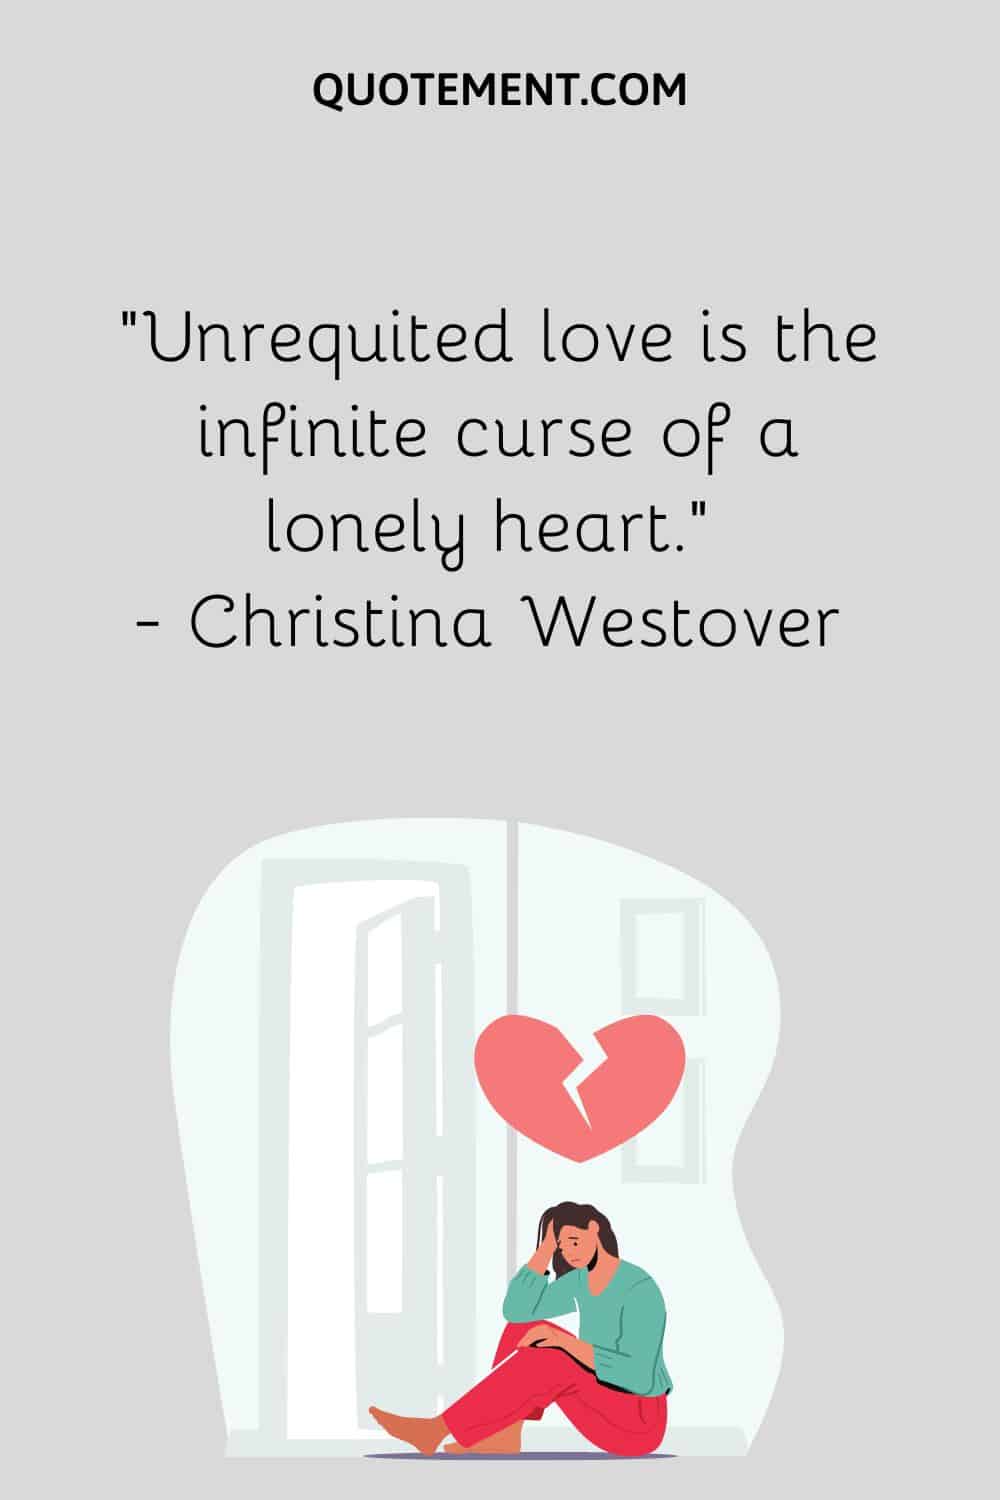 Unrequited love is the infinite curse of a lonely heart.